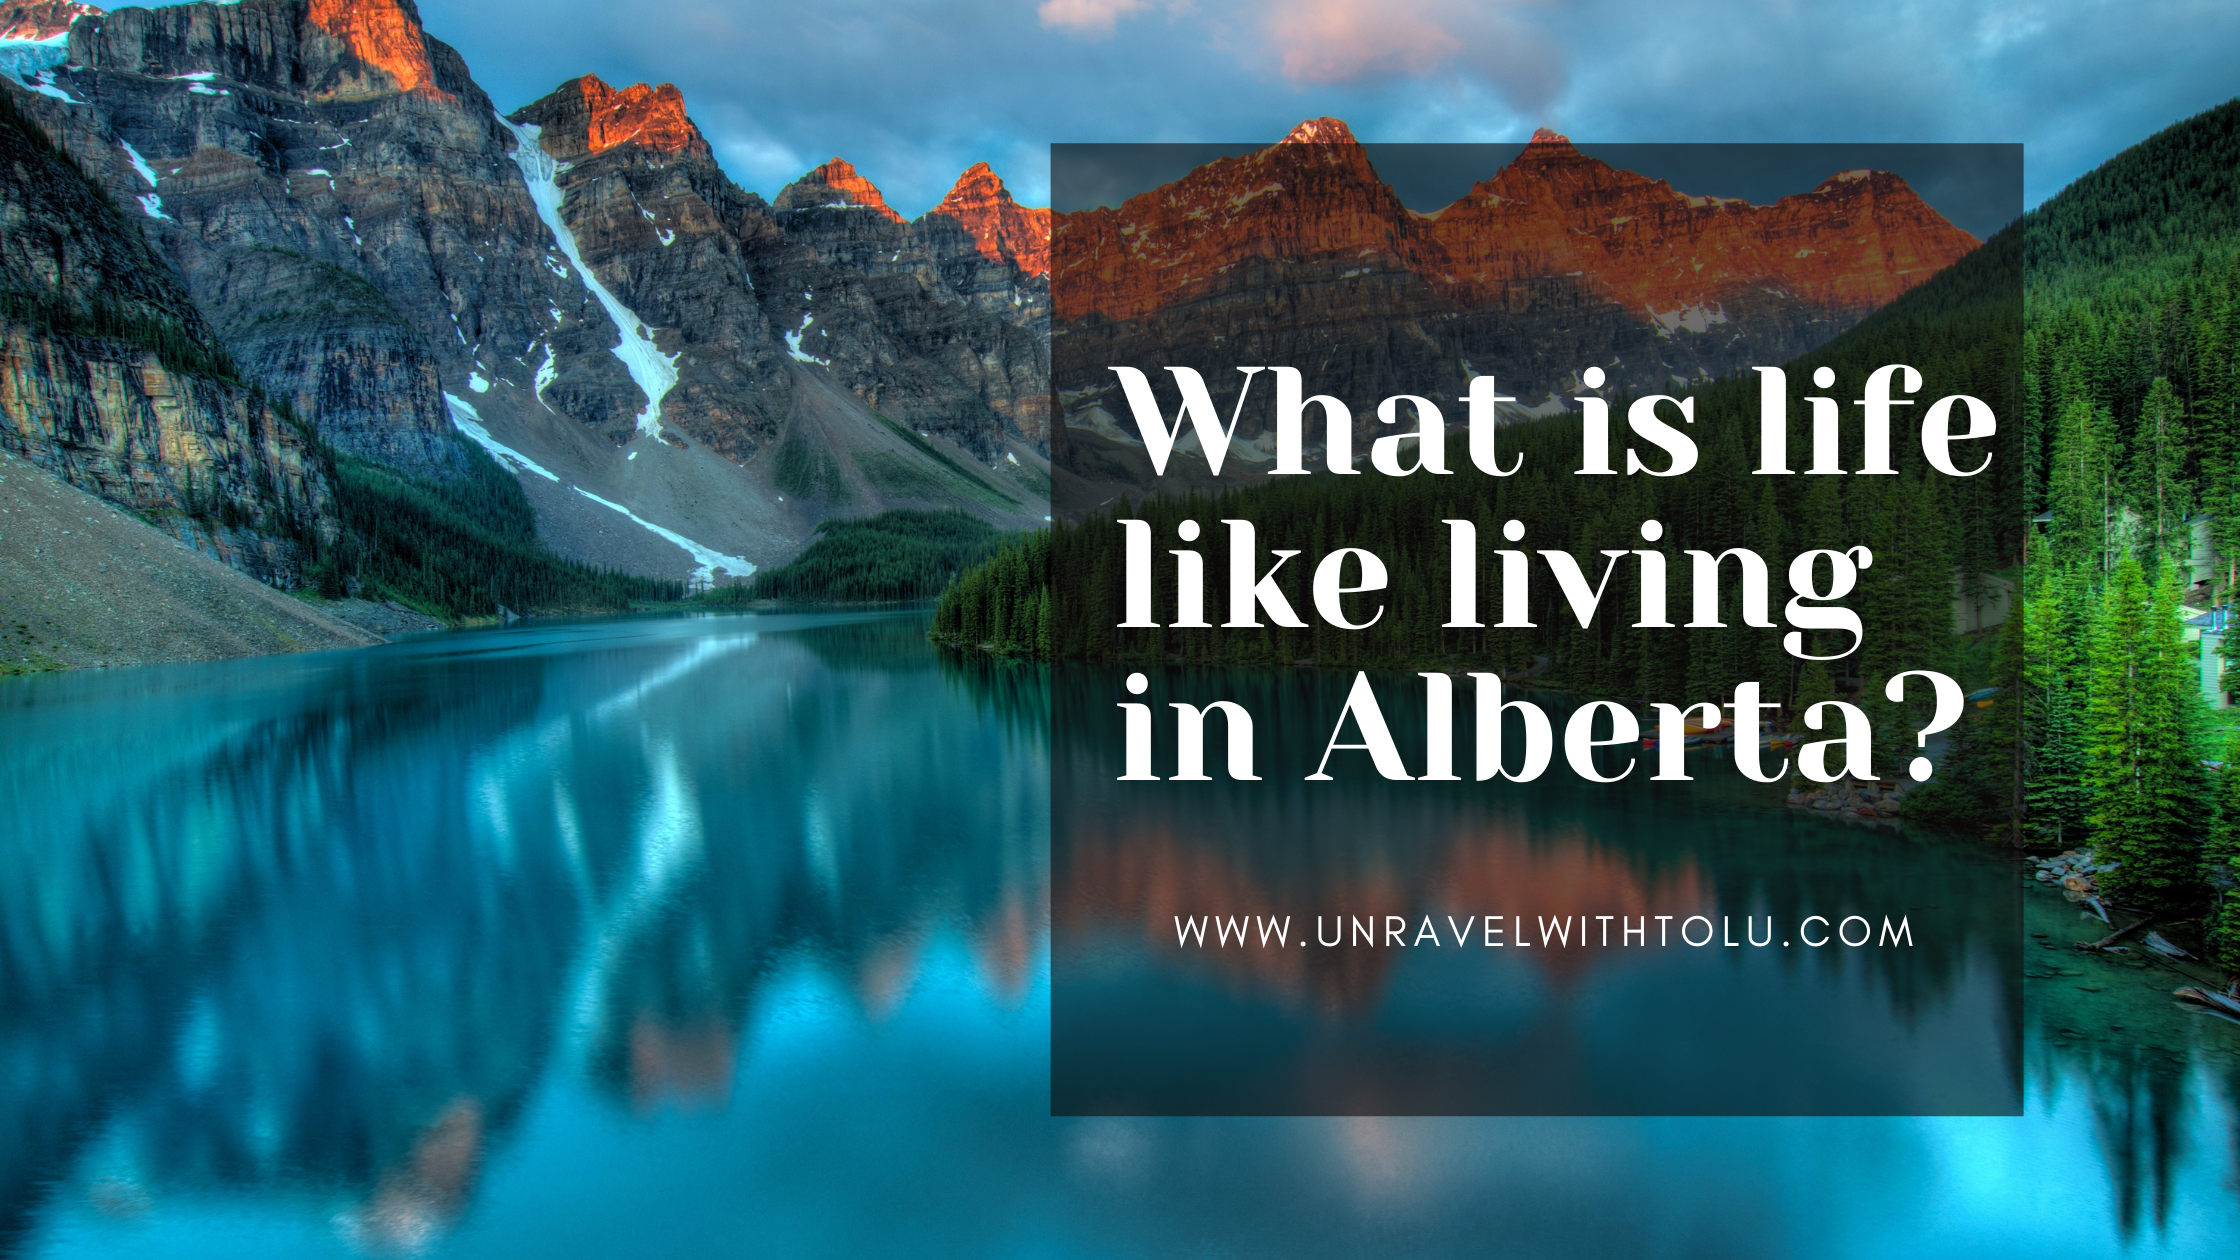 What is life like living in Alberta?